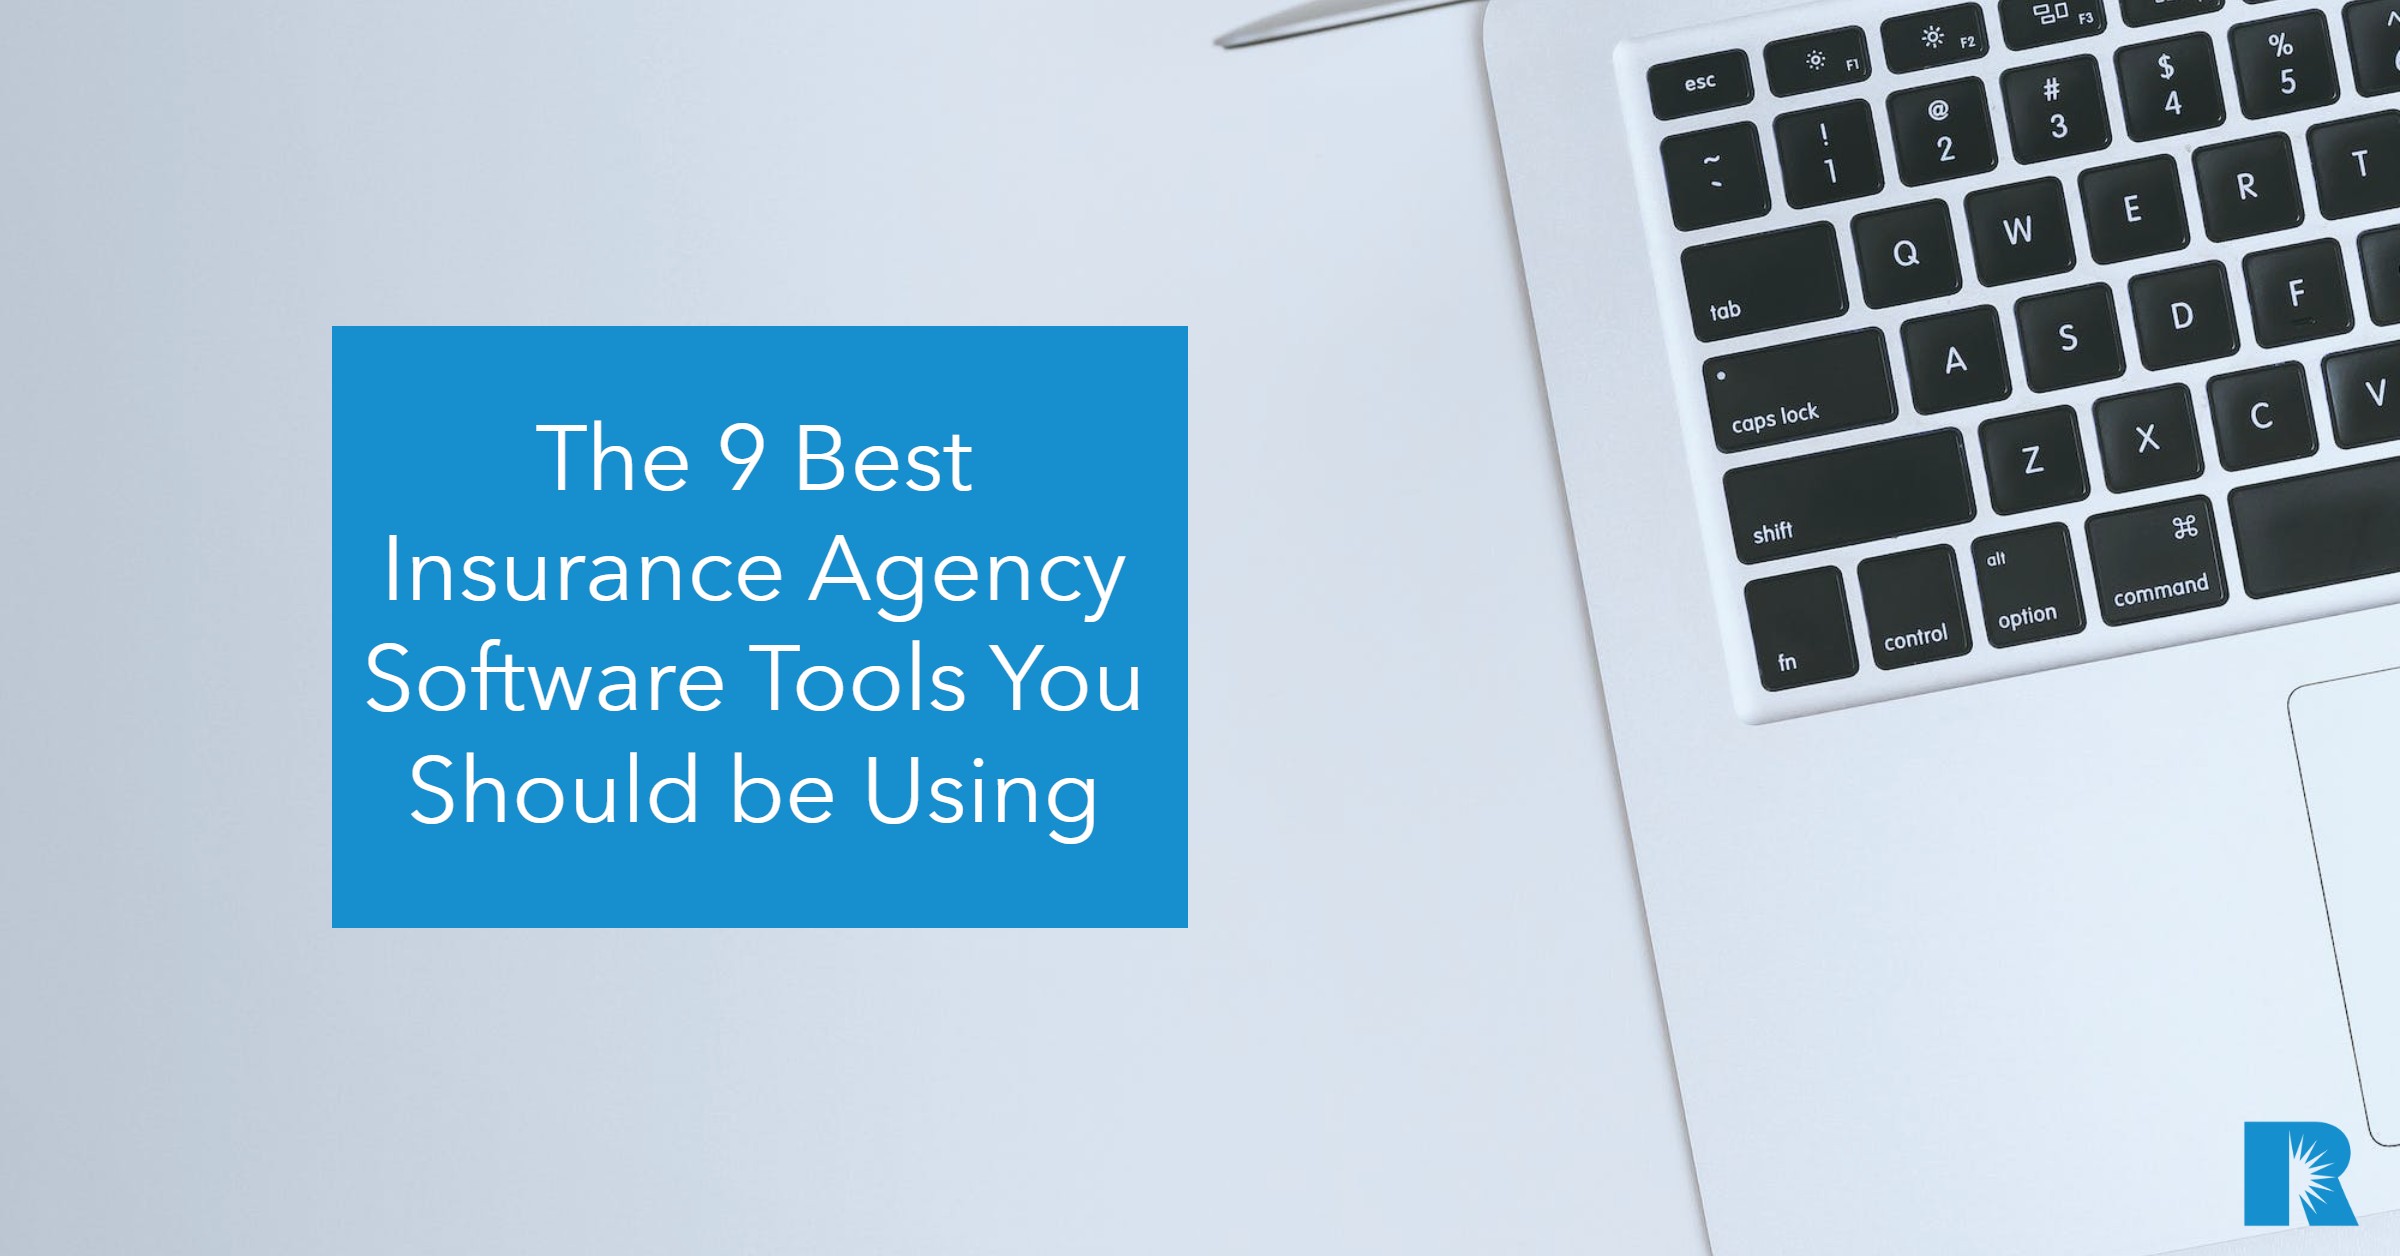 An insurance agent uses intuitive software tools to help run his agency more efficiently.